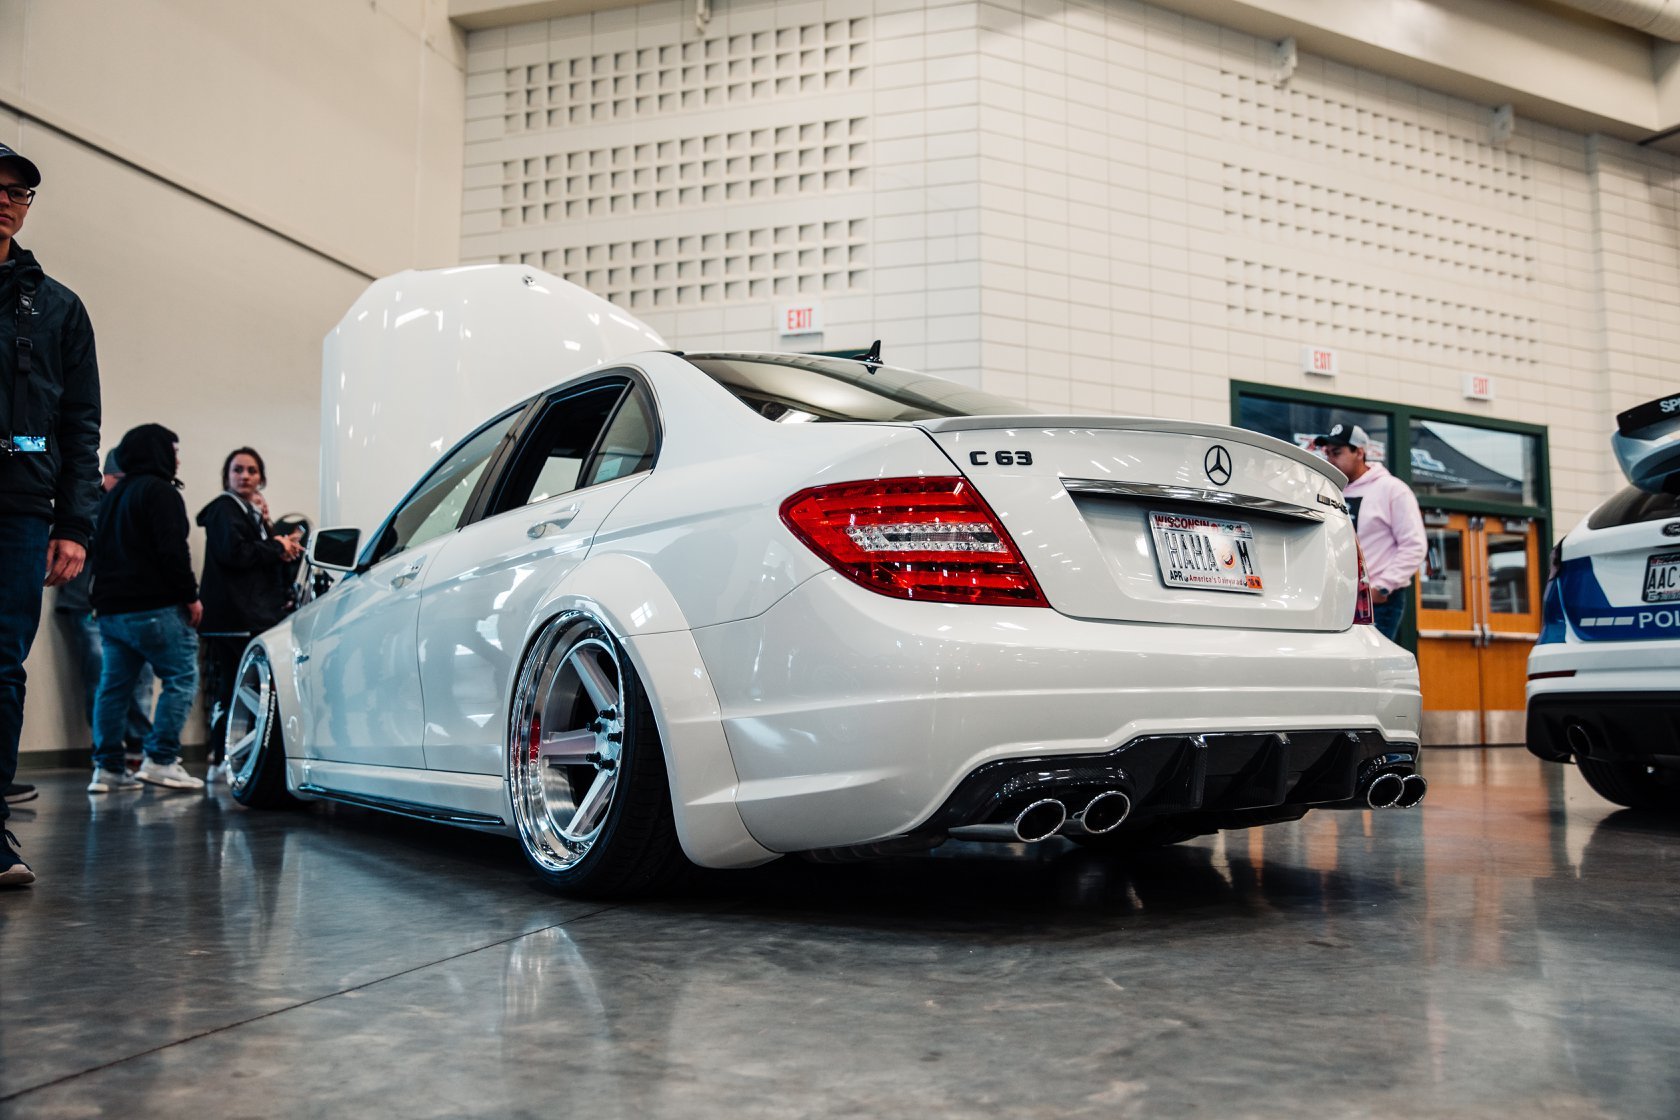 charles ho fung 2012 mercedes c63 amg august featured car of the month